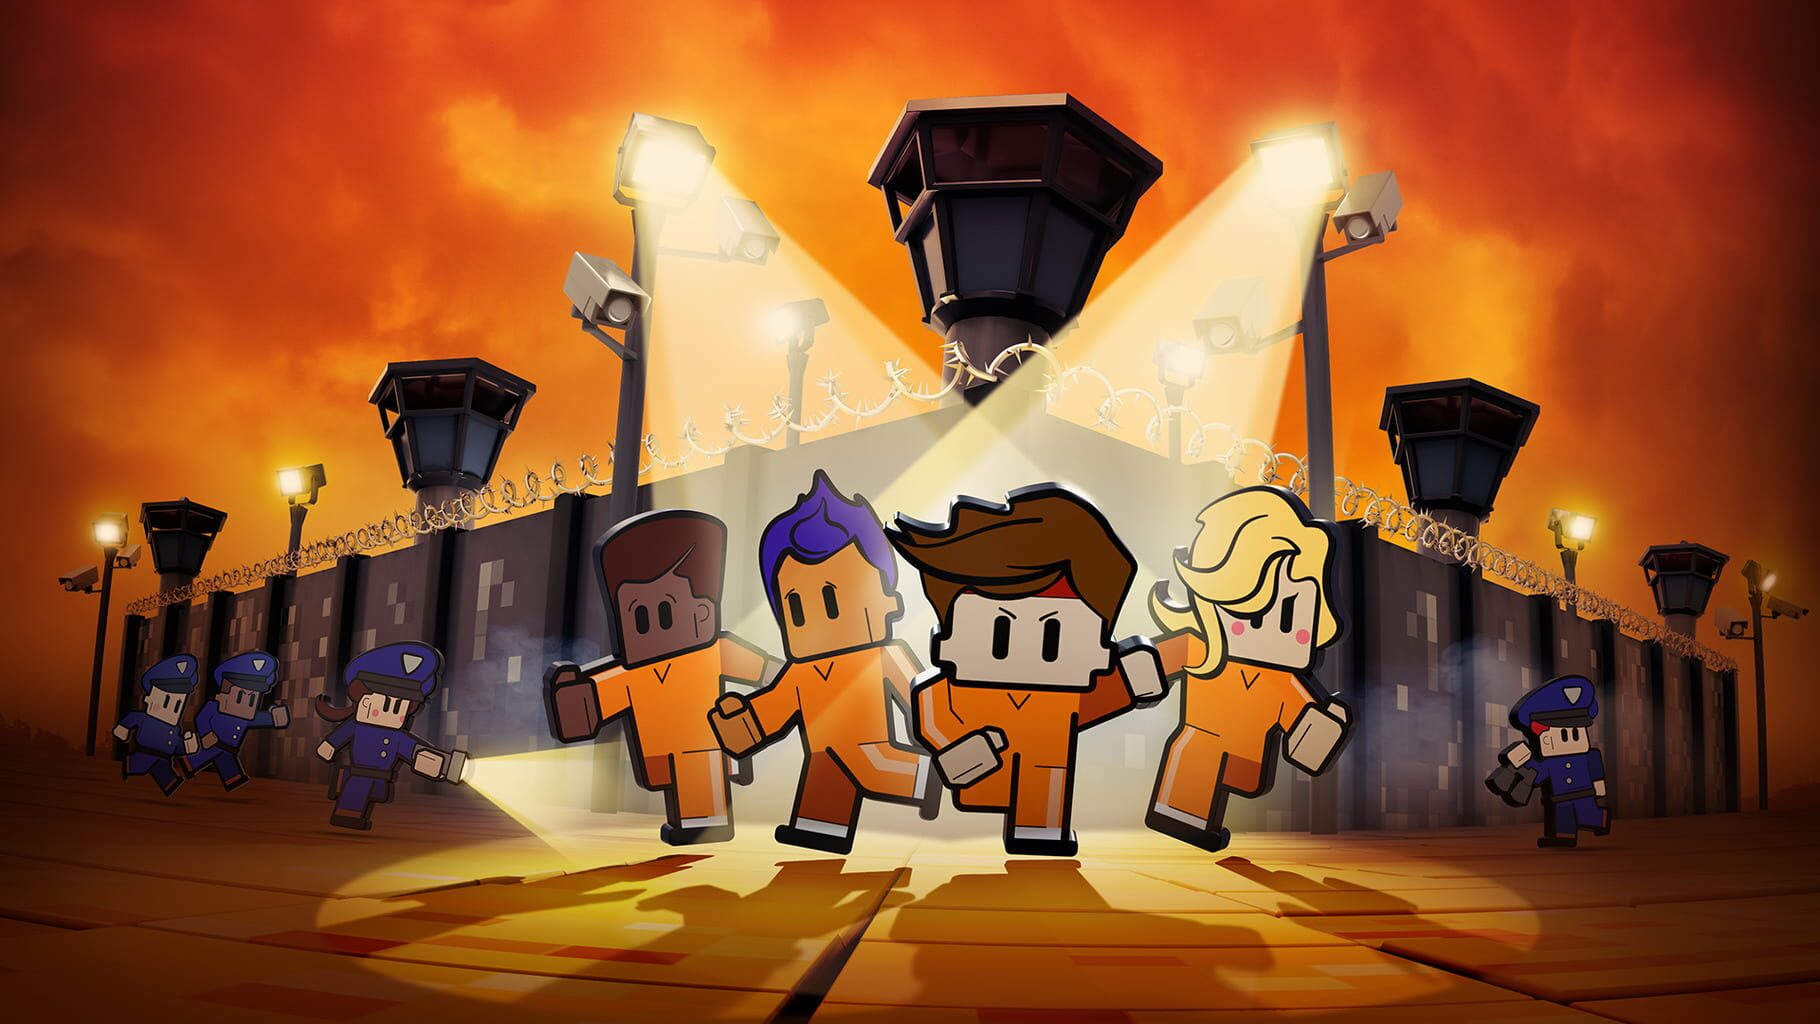 Artwork for The Escapists 2